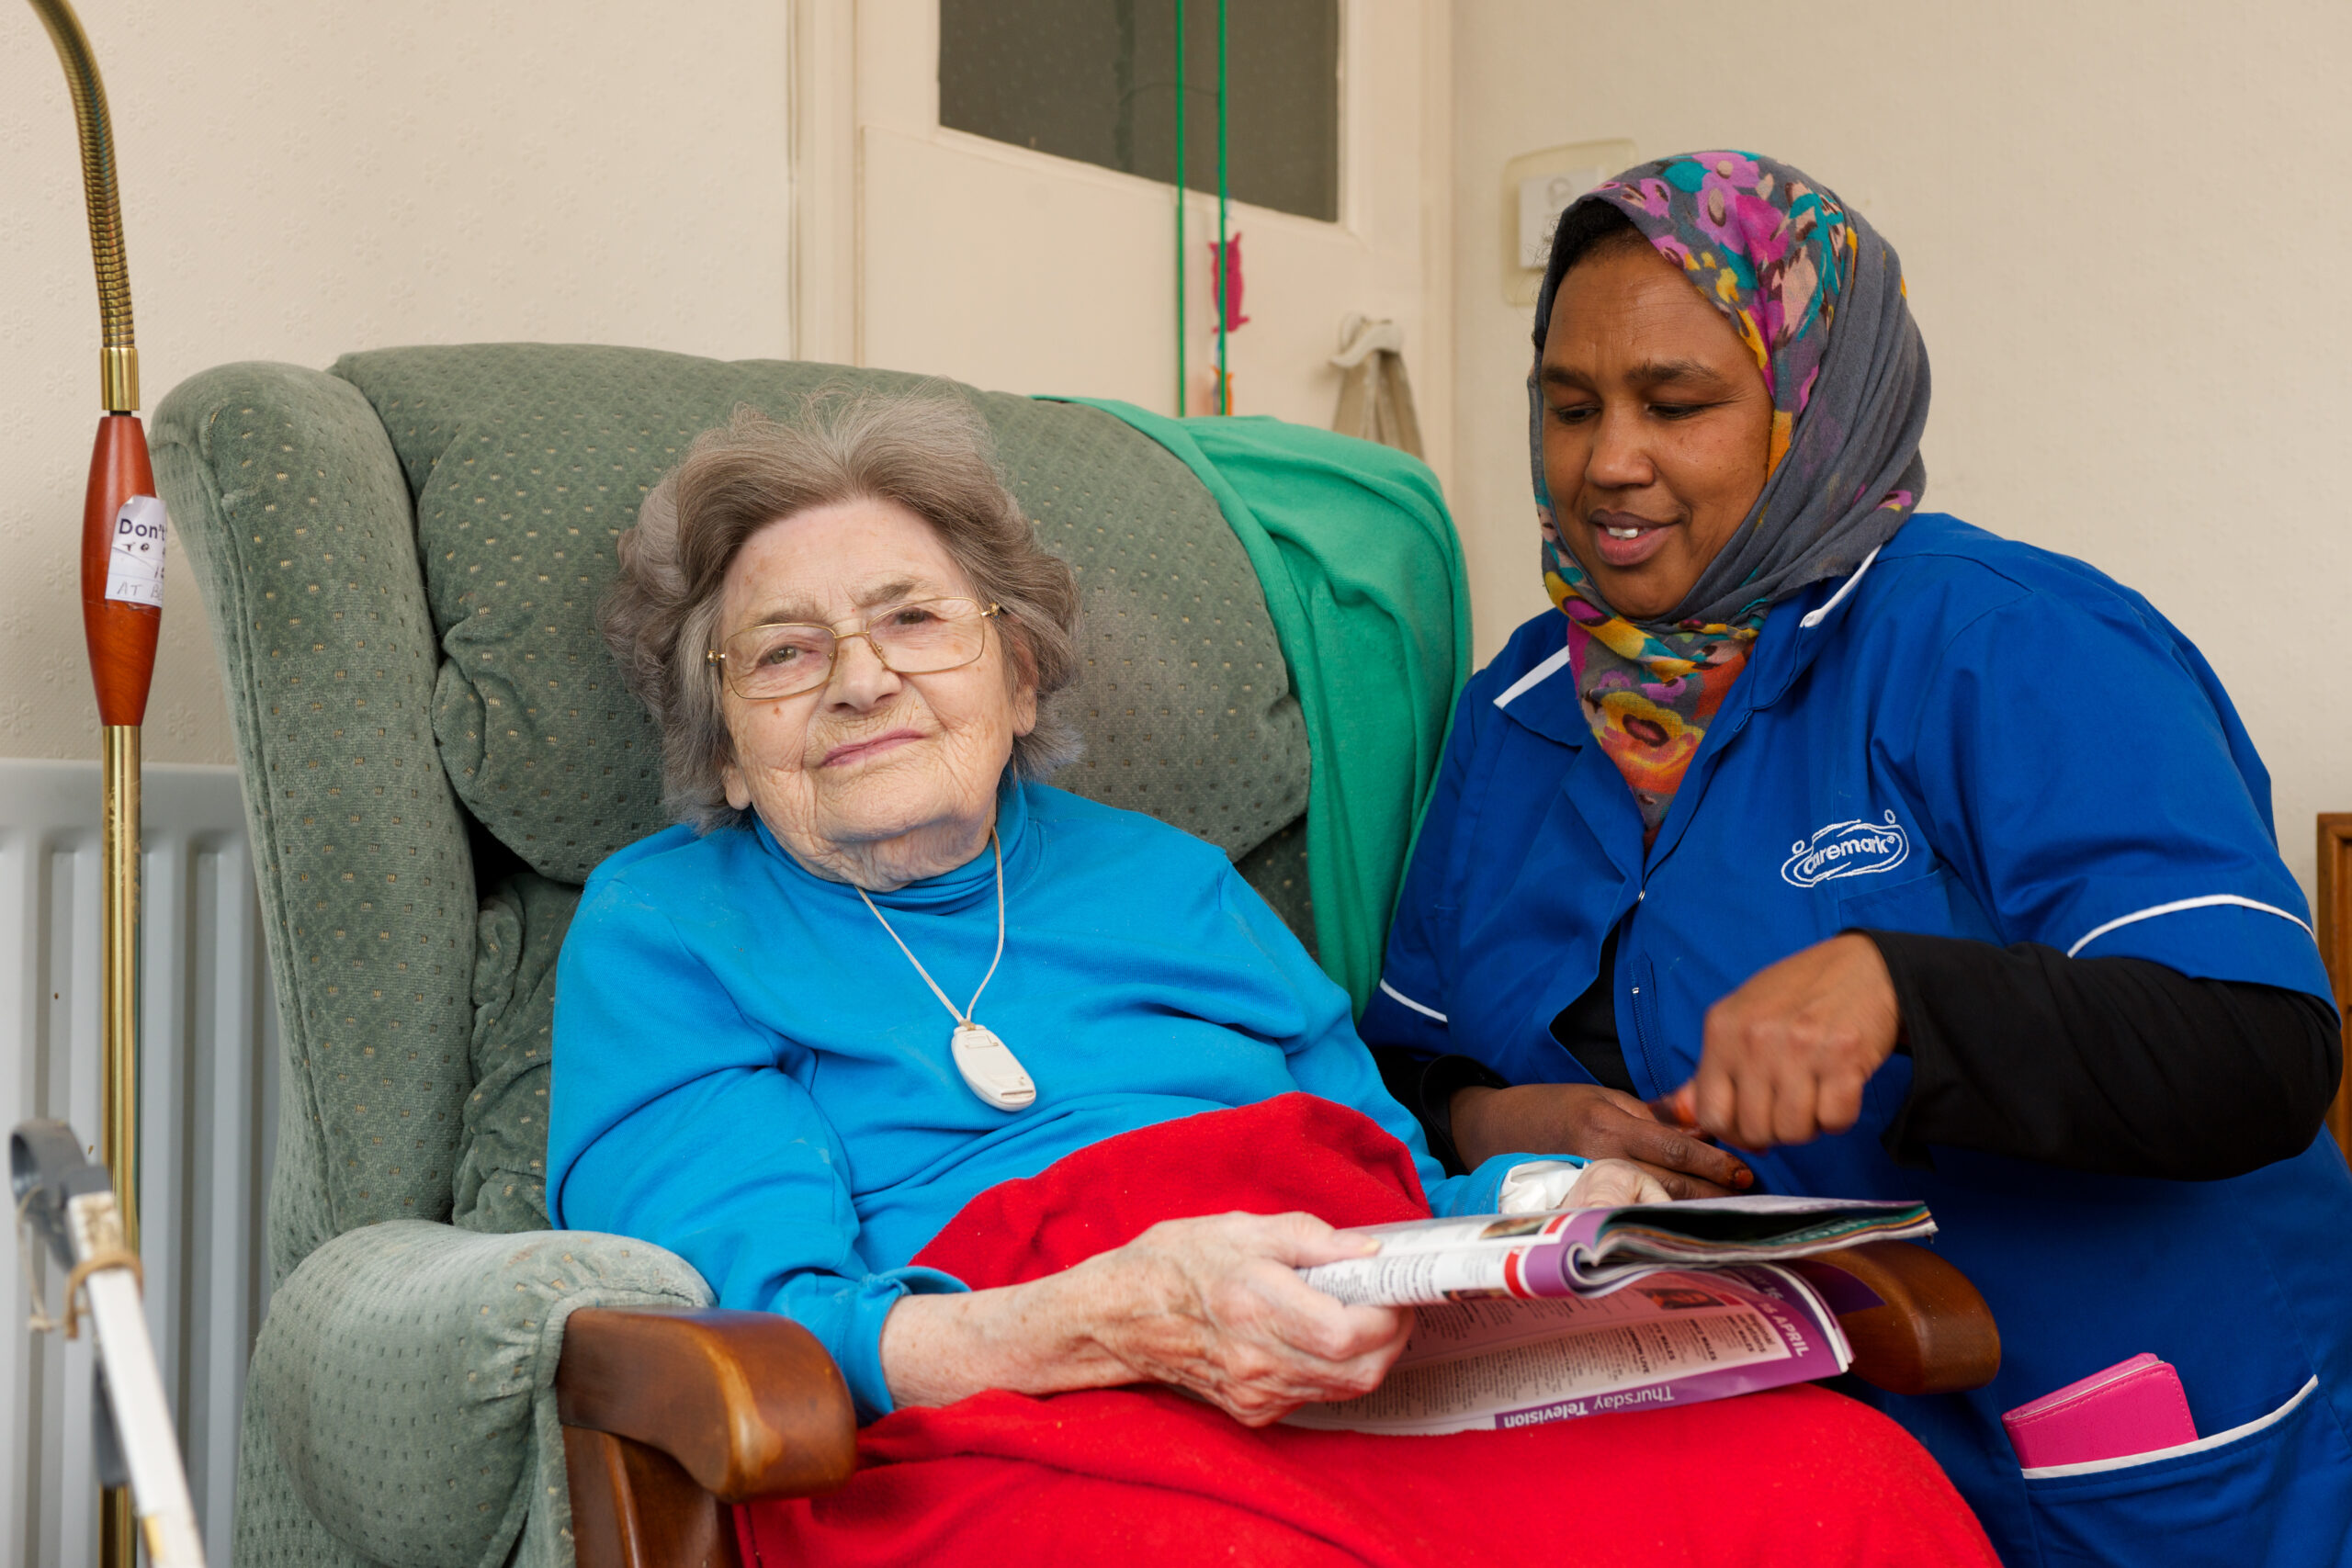 Empowering Service Users and Families: The Benefits of Home Care with Caremark